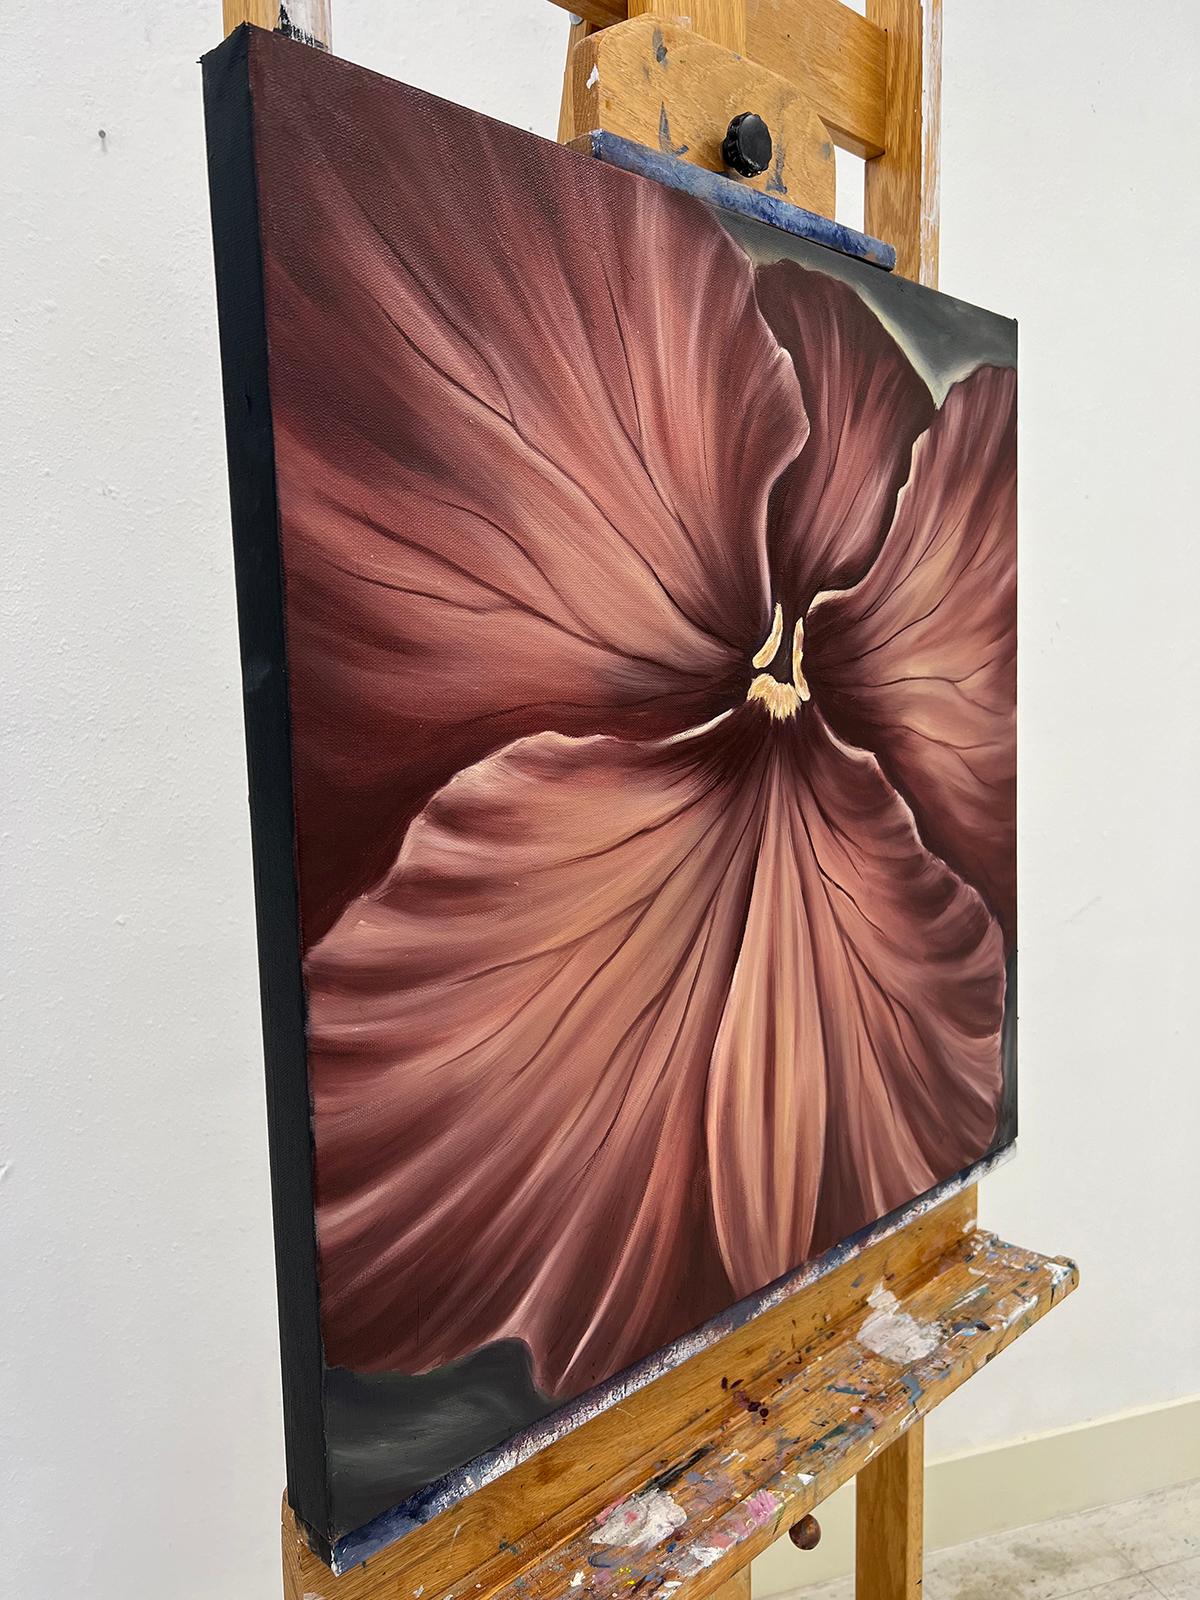 <p>Artist Comments<br>A fully-bloomed pansy flower displays the velvety texture of its petals. The vein markings and subtle shadows define its delicate form. Artist Pamela Hoke paints the same subject each year to remind herself of her deep